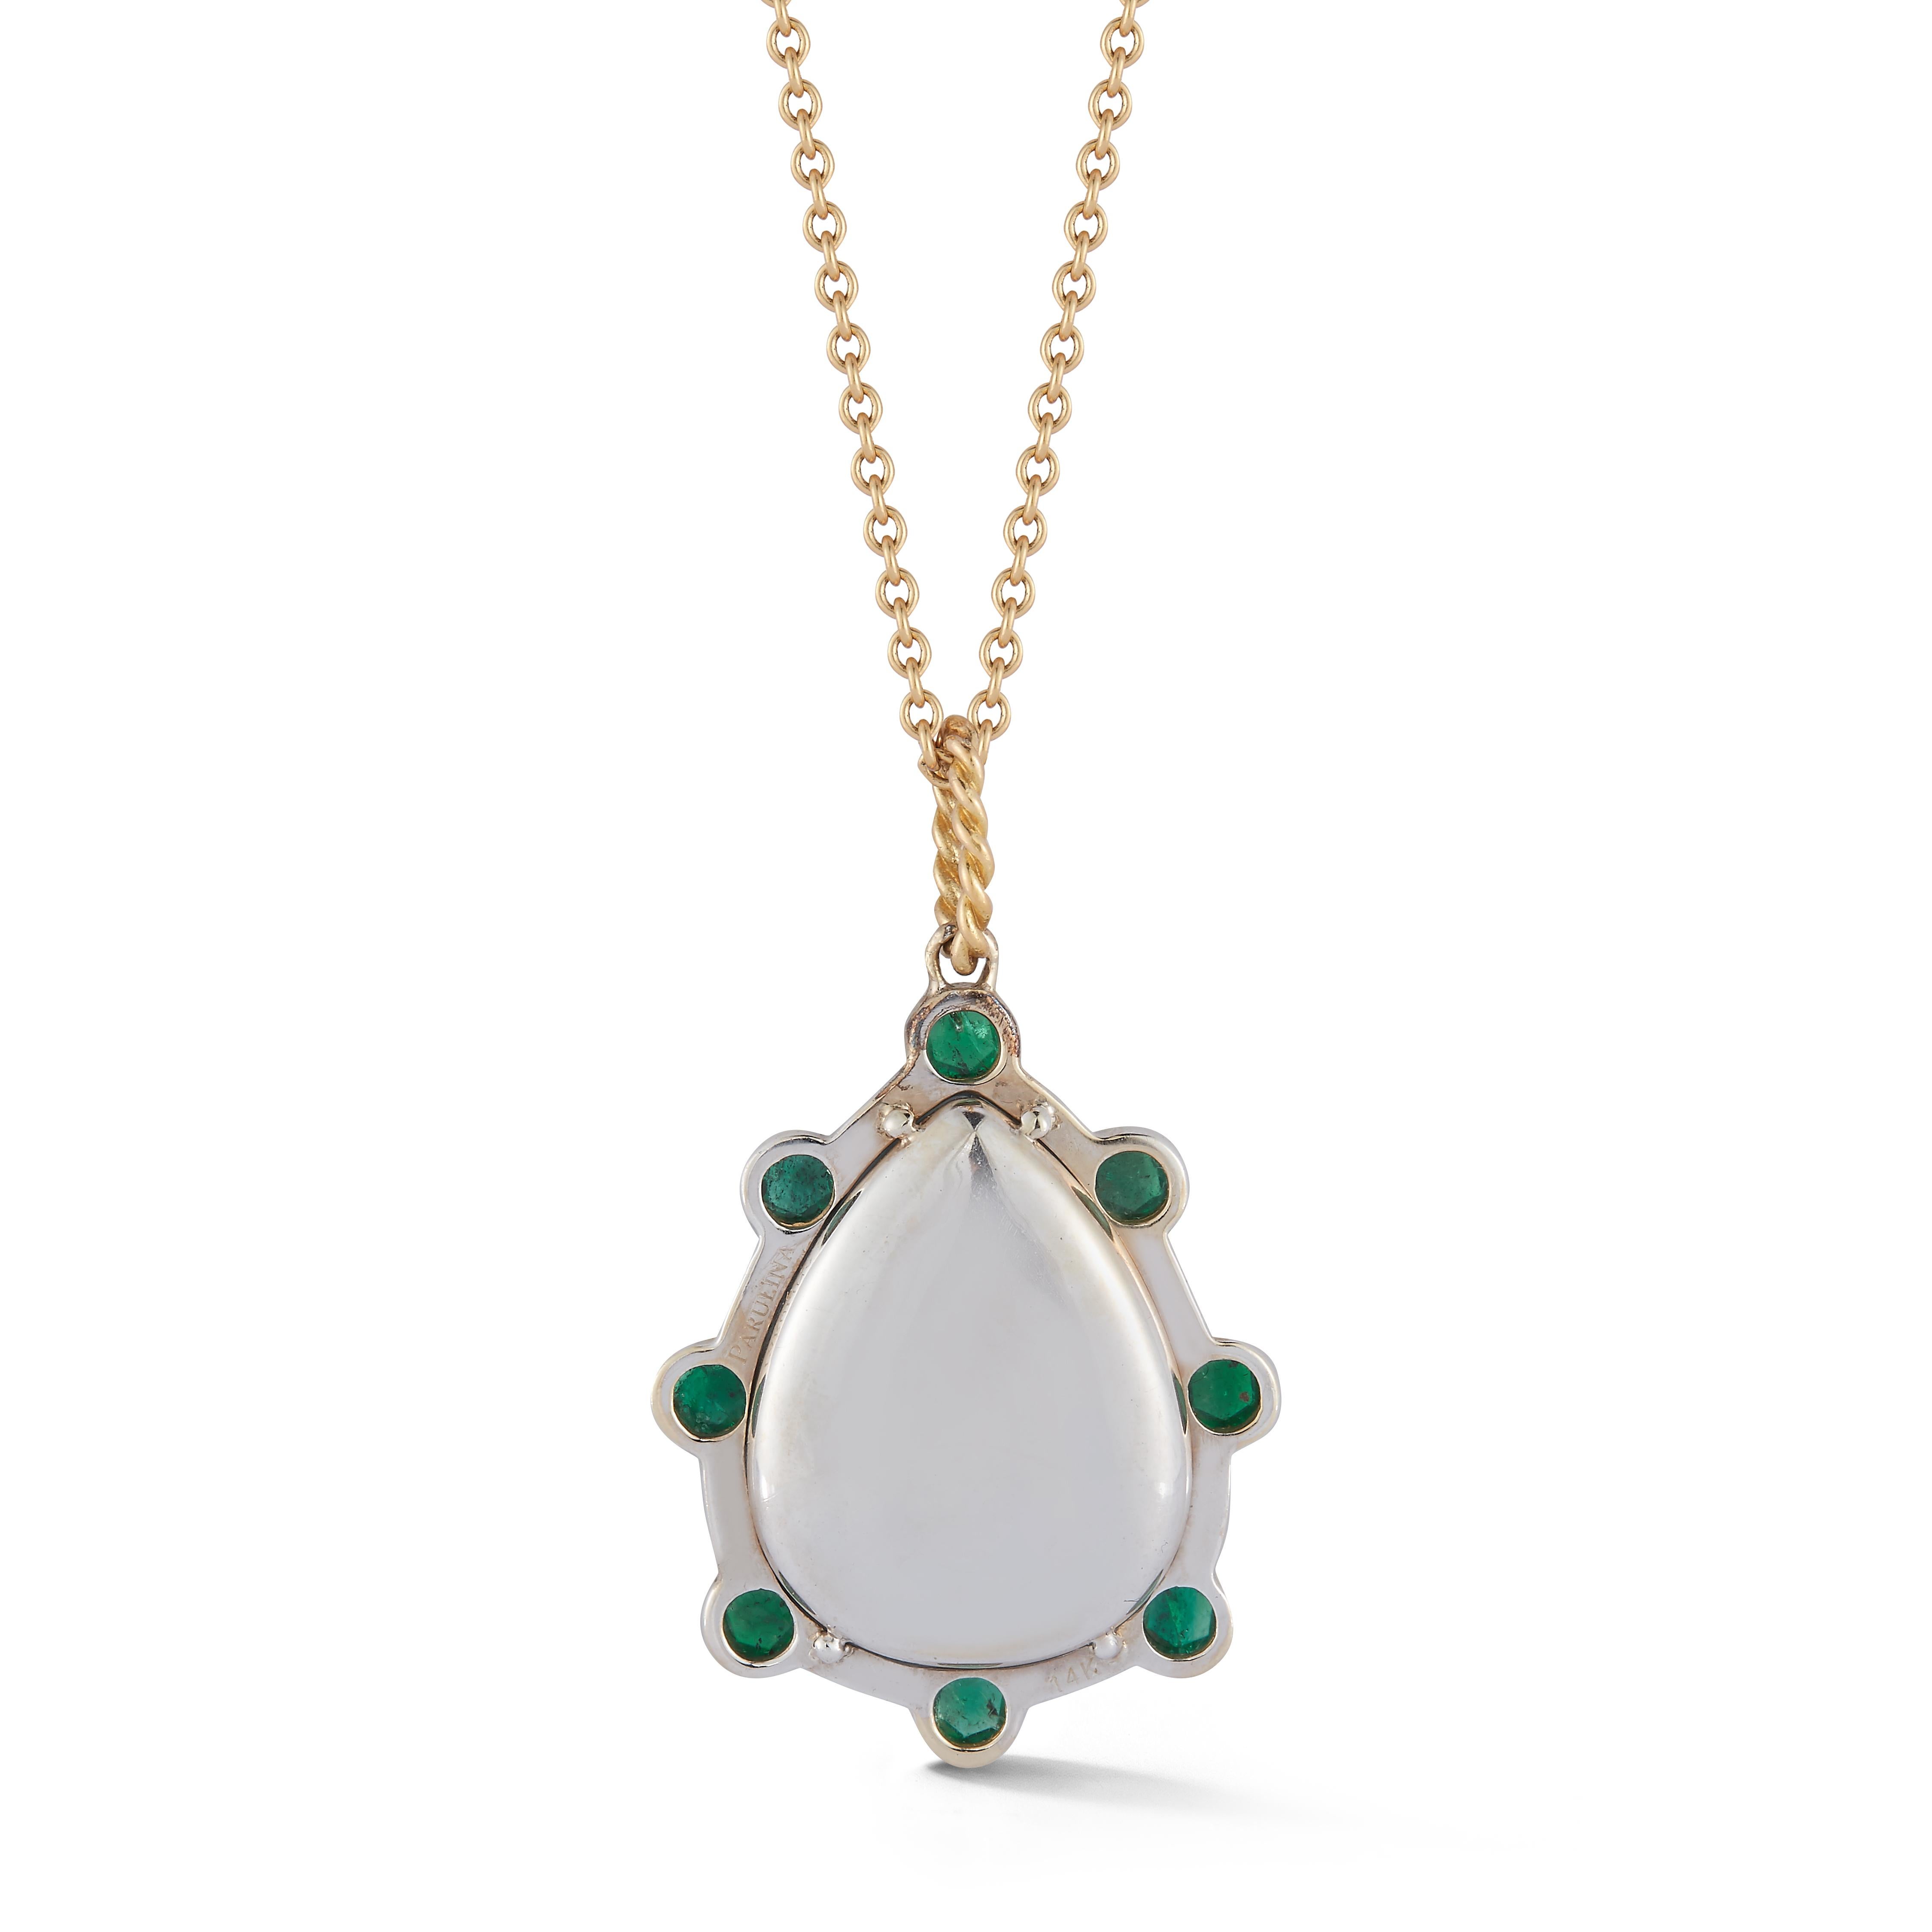 Parulina Couture Fine Jewelry - Aquamarine and Emerald Pendant with Diamond accent from the Heaven and Earth Collection.
18 inch chain length.

Metal: 14k White Gold
Gemstone Carat Weight: 9.80ct Aquamarine & 1.40ct Emeralds
Diamond Carat Weight: